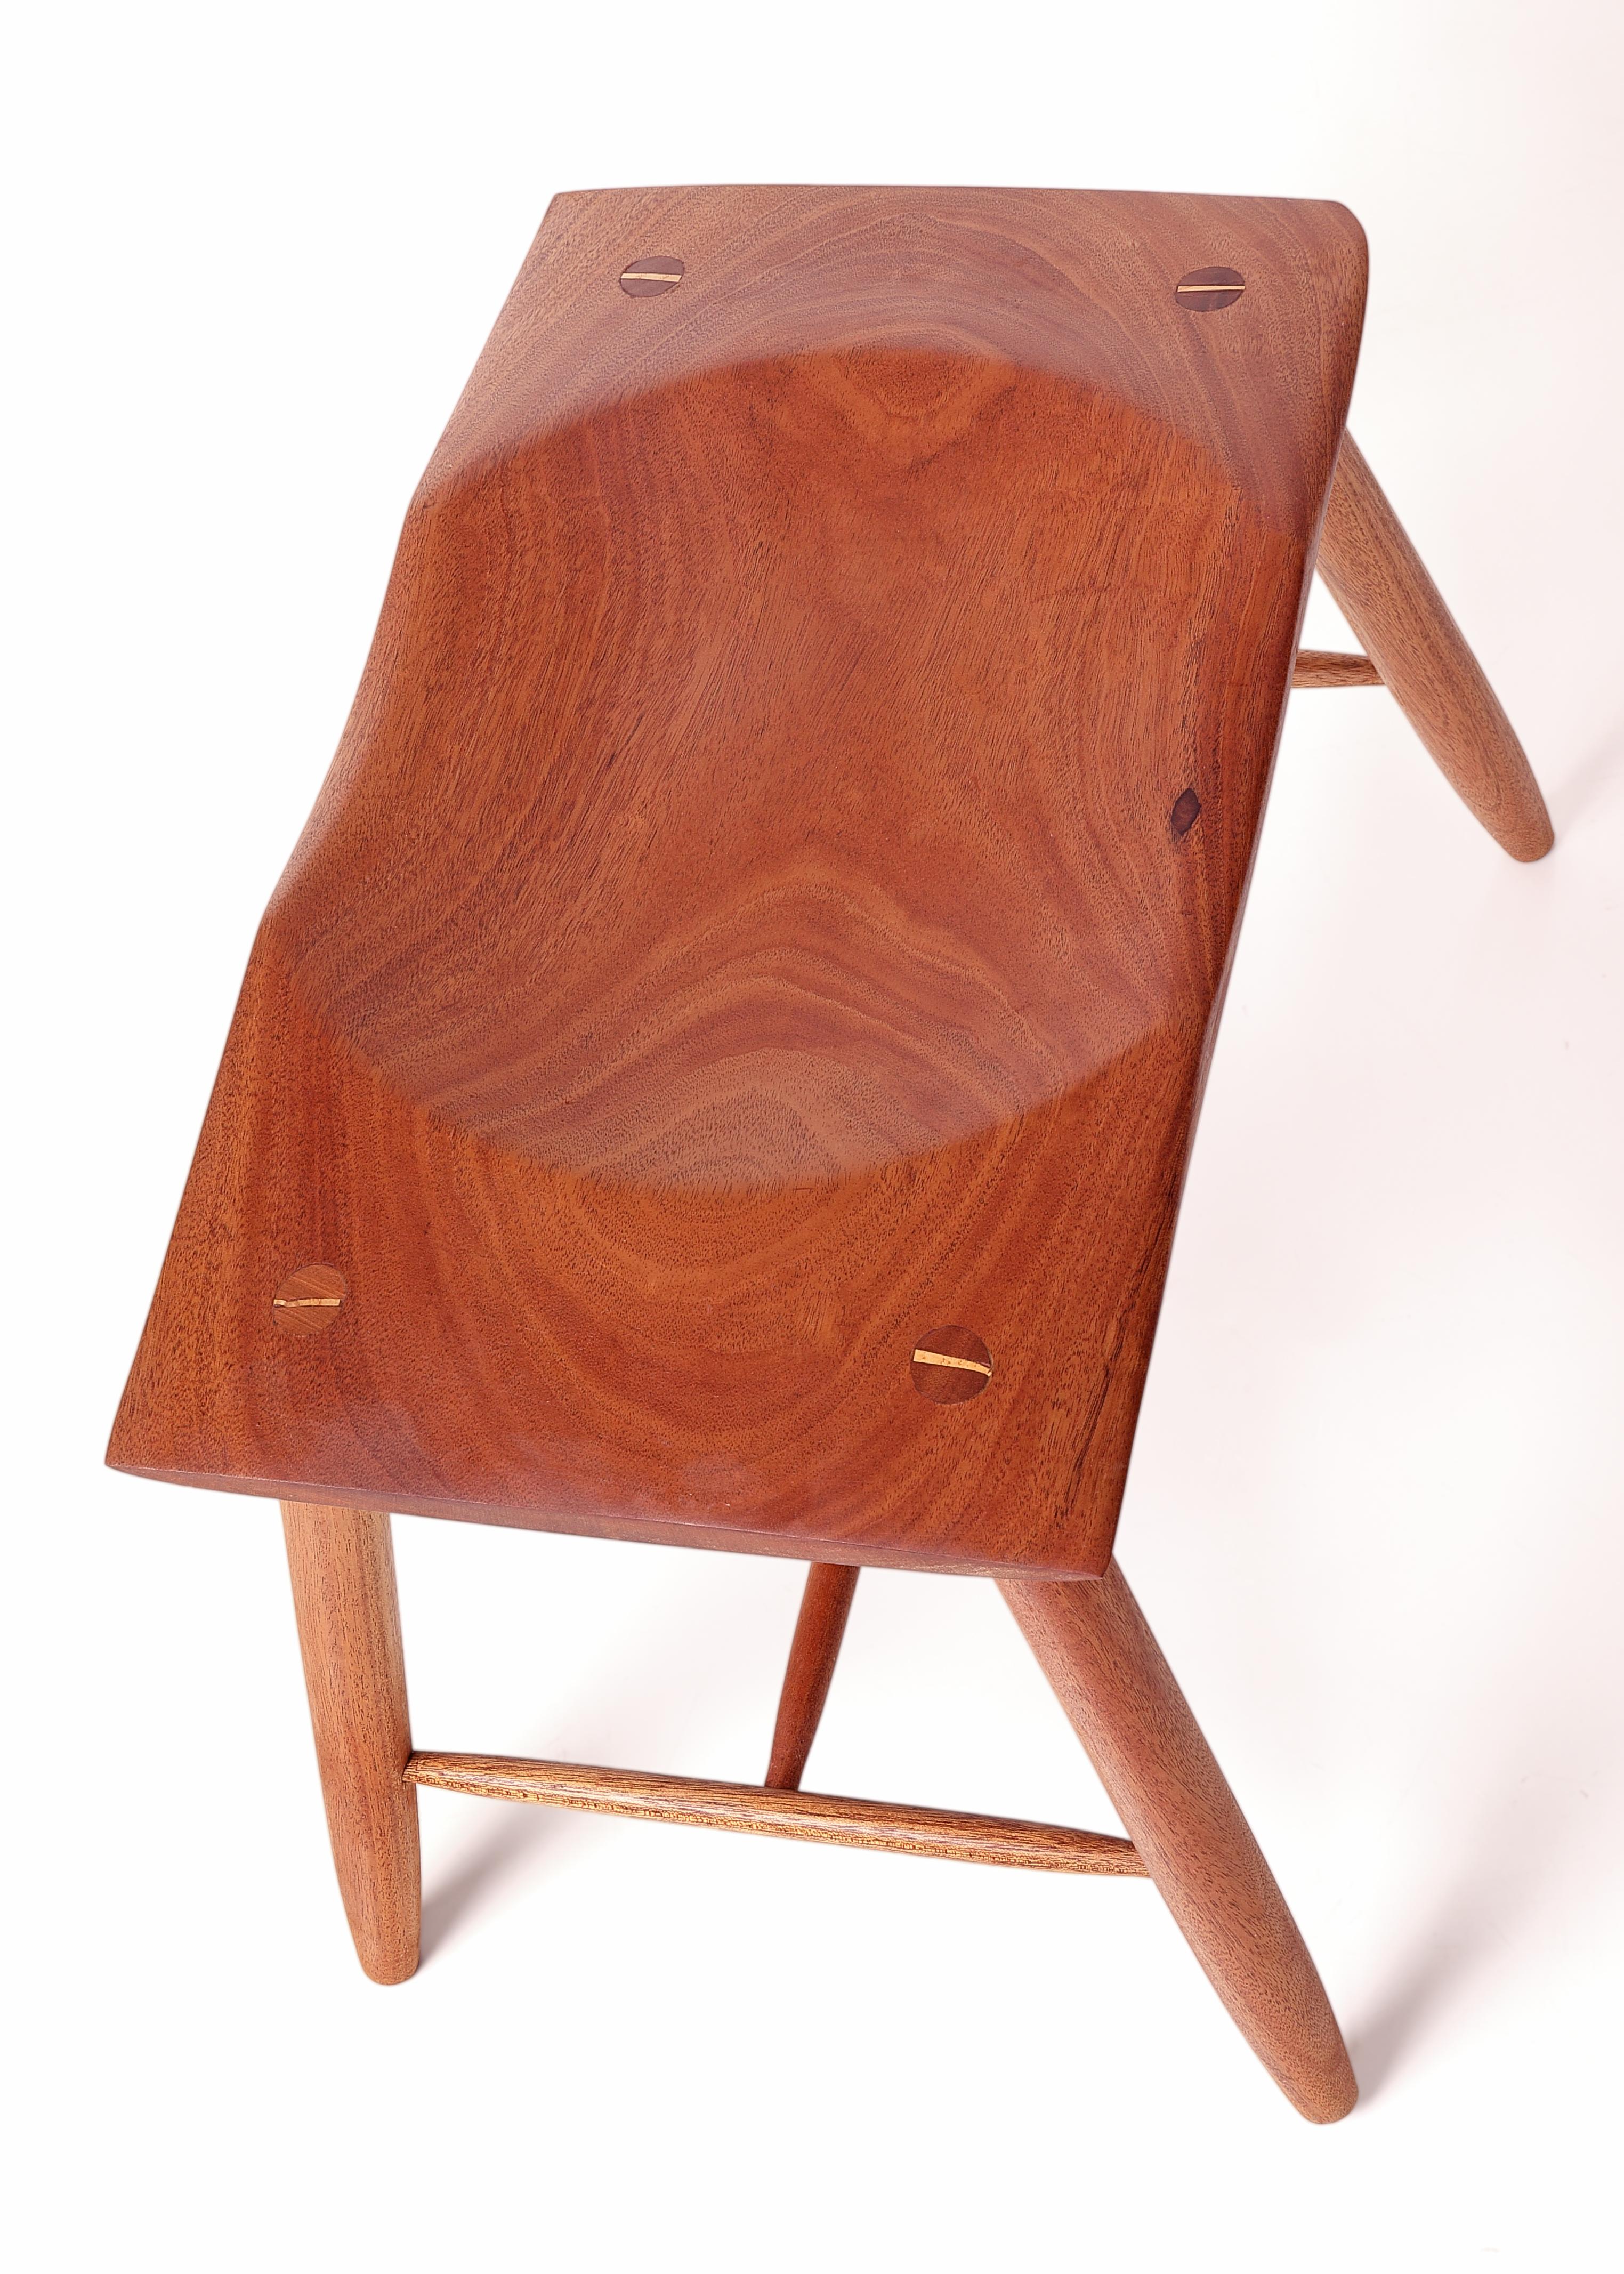 American Mahogany turned and carved rectangular stool by Michael Rozell, USA - new  For Sale